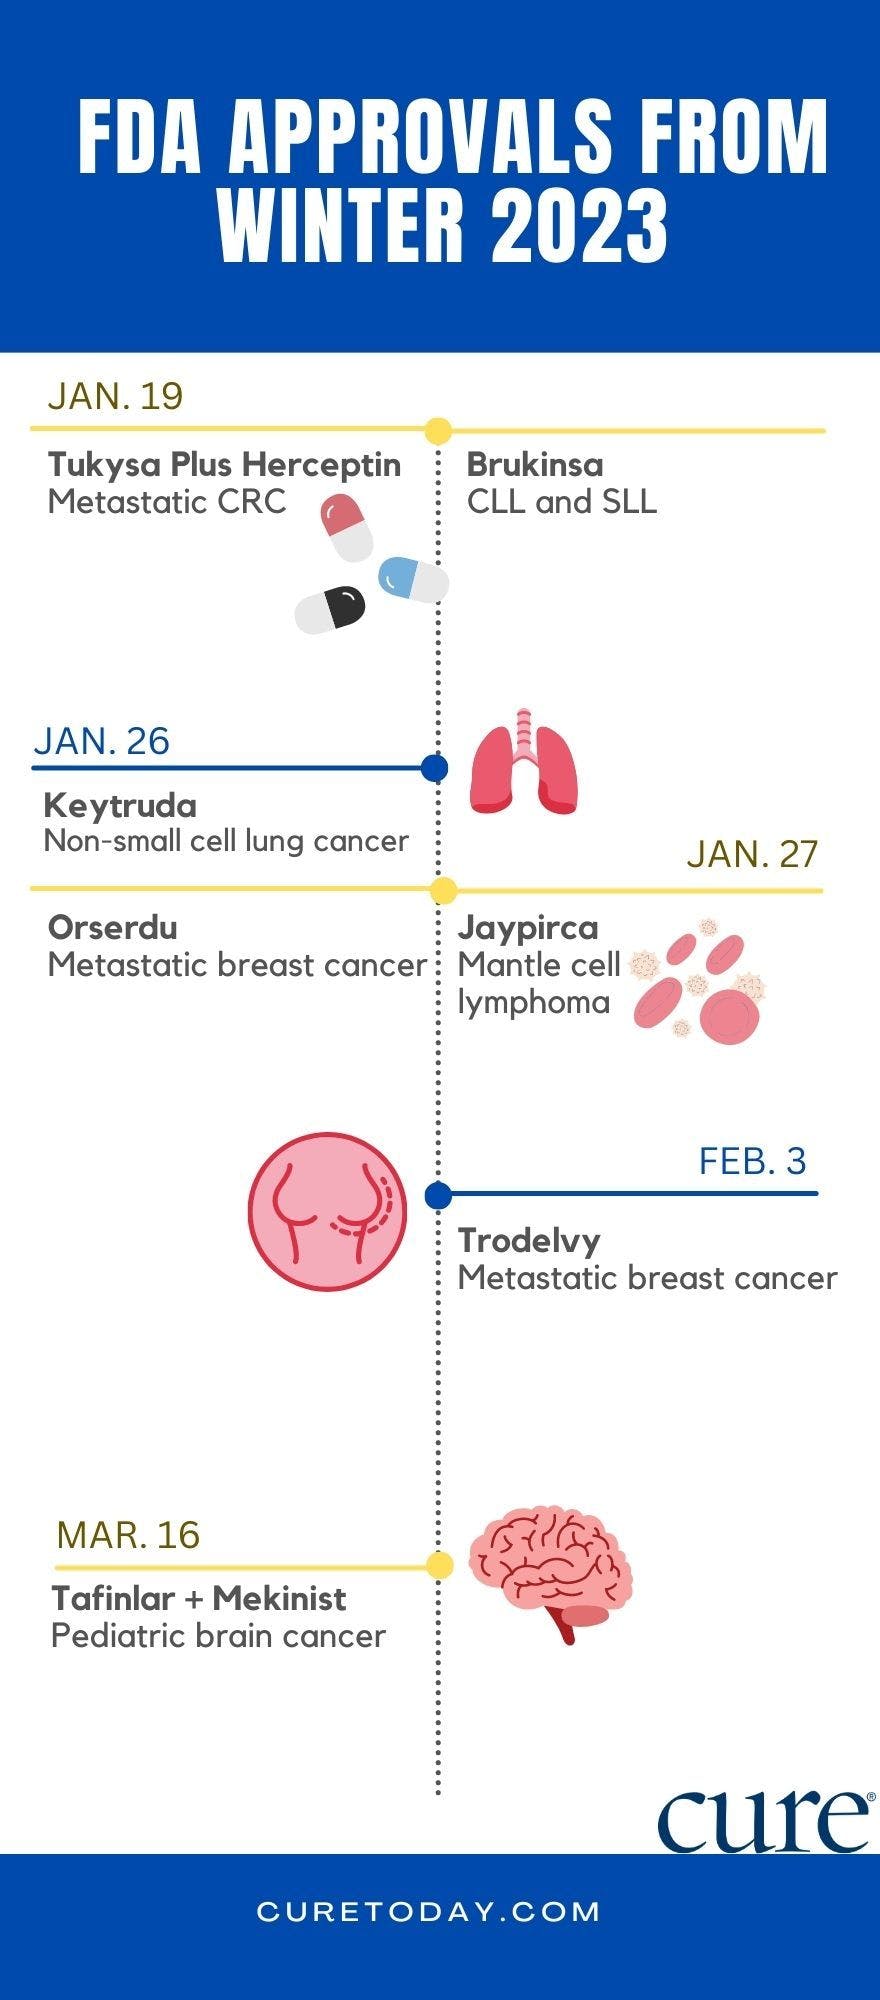 Timeline outlining 7 oncology FDA approvals from the winter of 2023 